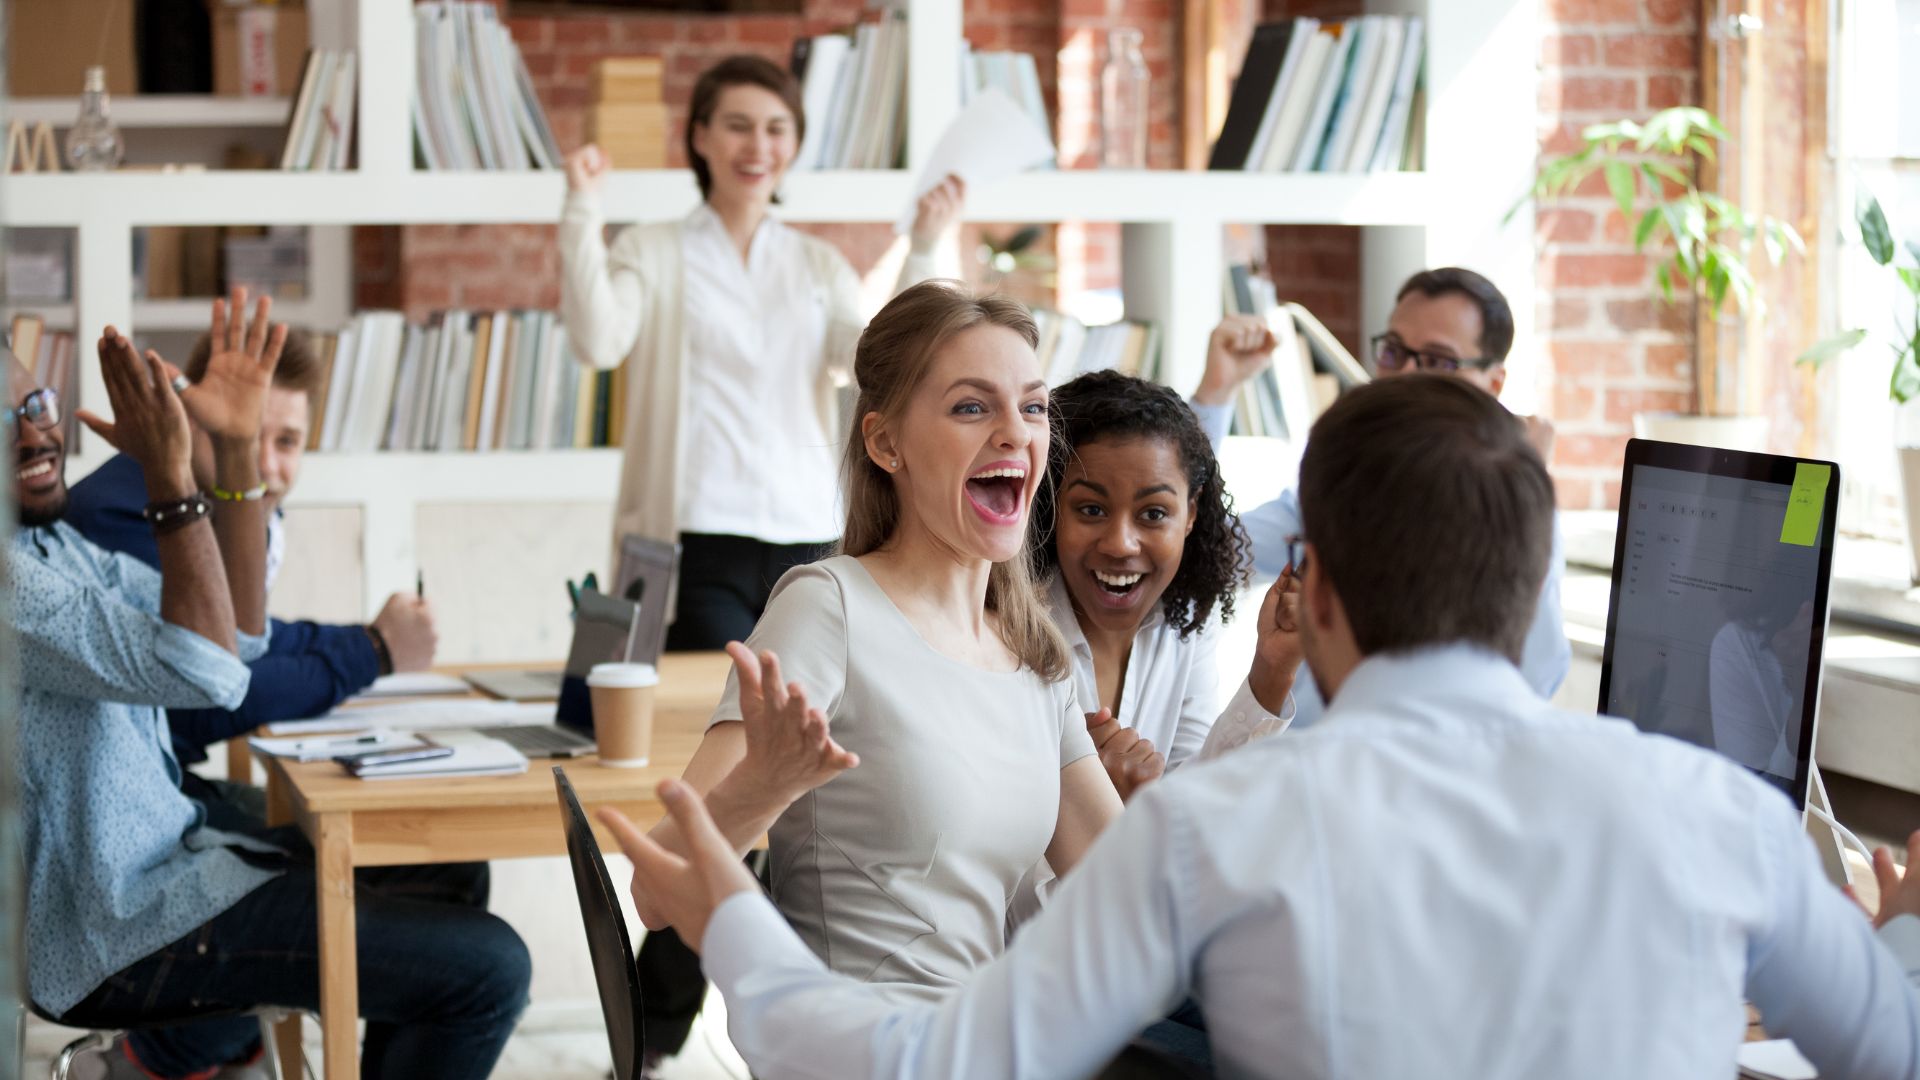 Team of happy employees cheering together during meeting | Organizational Culture